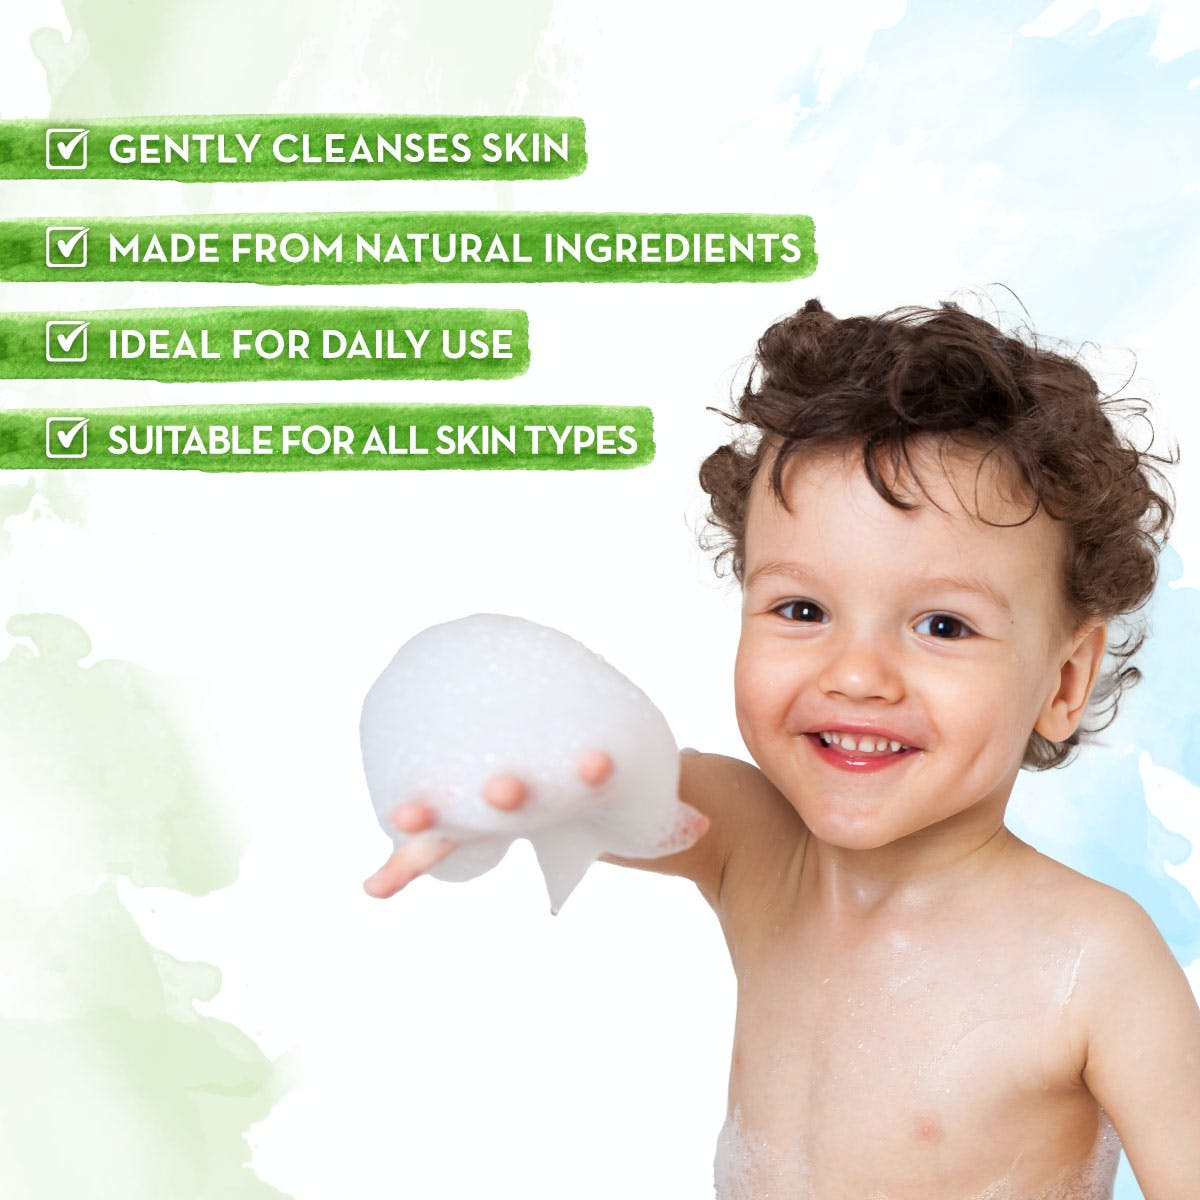 MamaEarth Super Strawberry Body Wash for Kids (300 ml) MamaEarth Baby